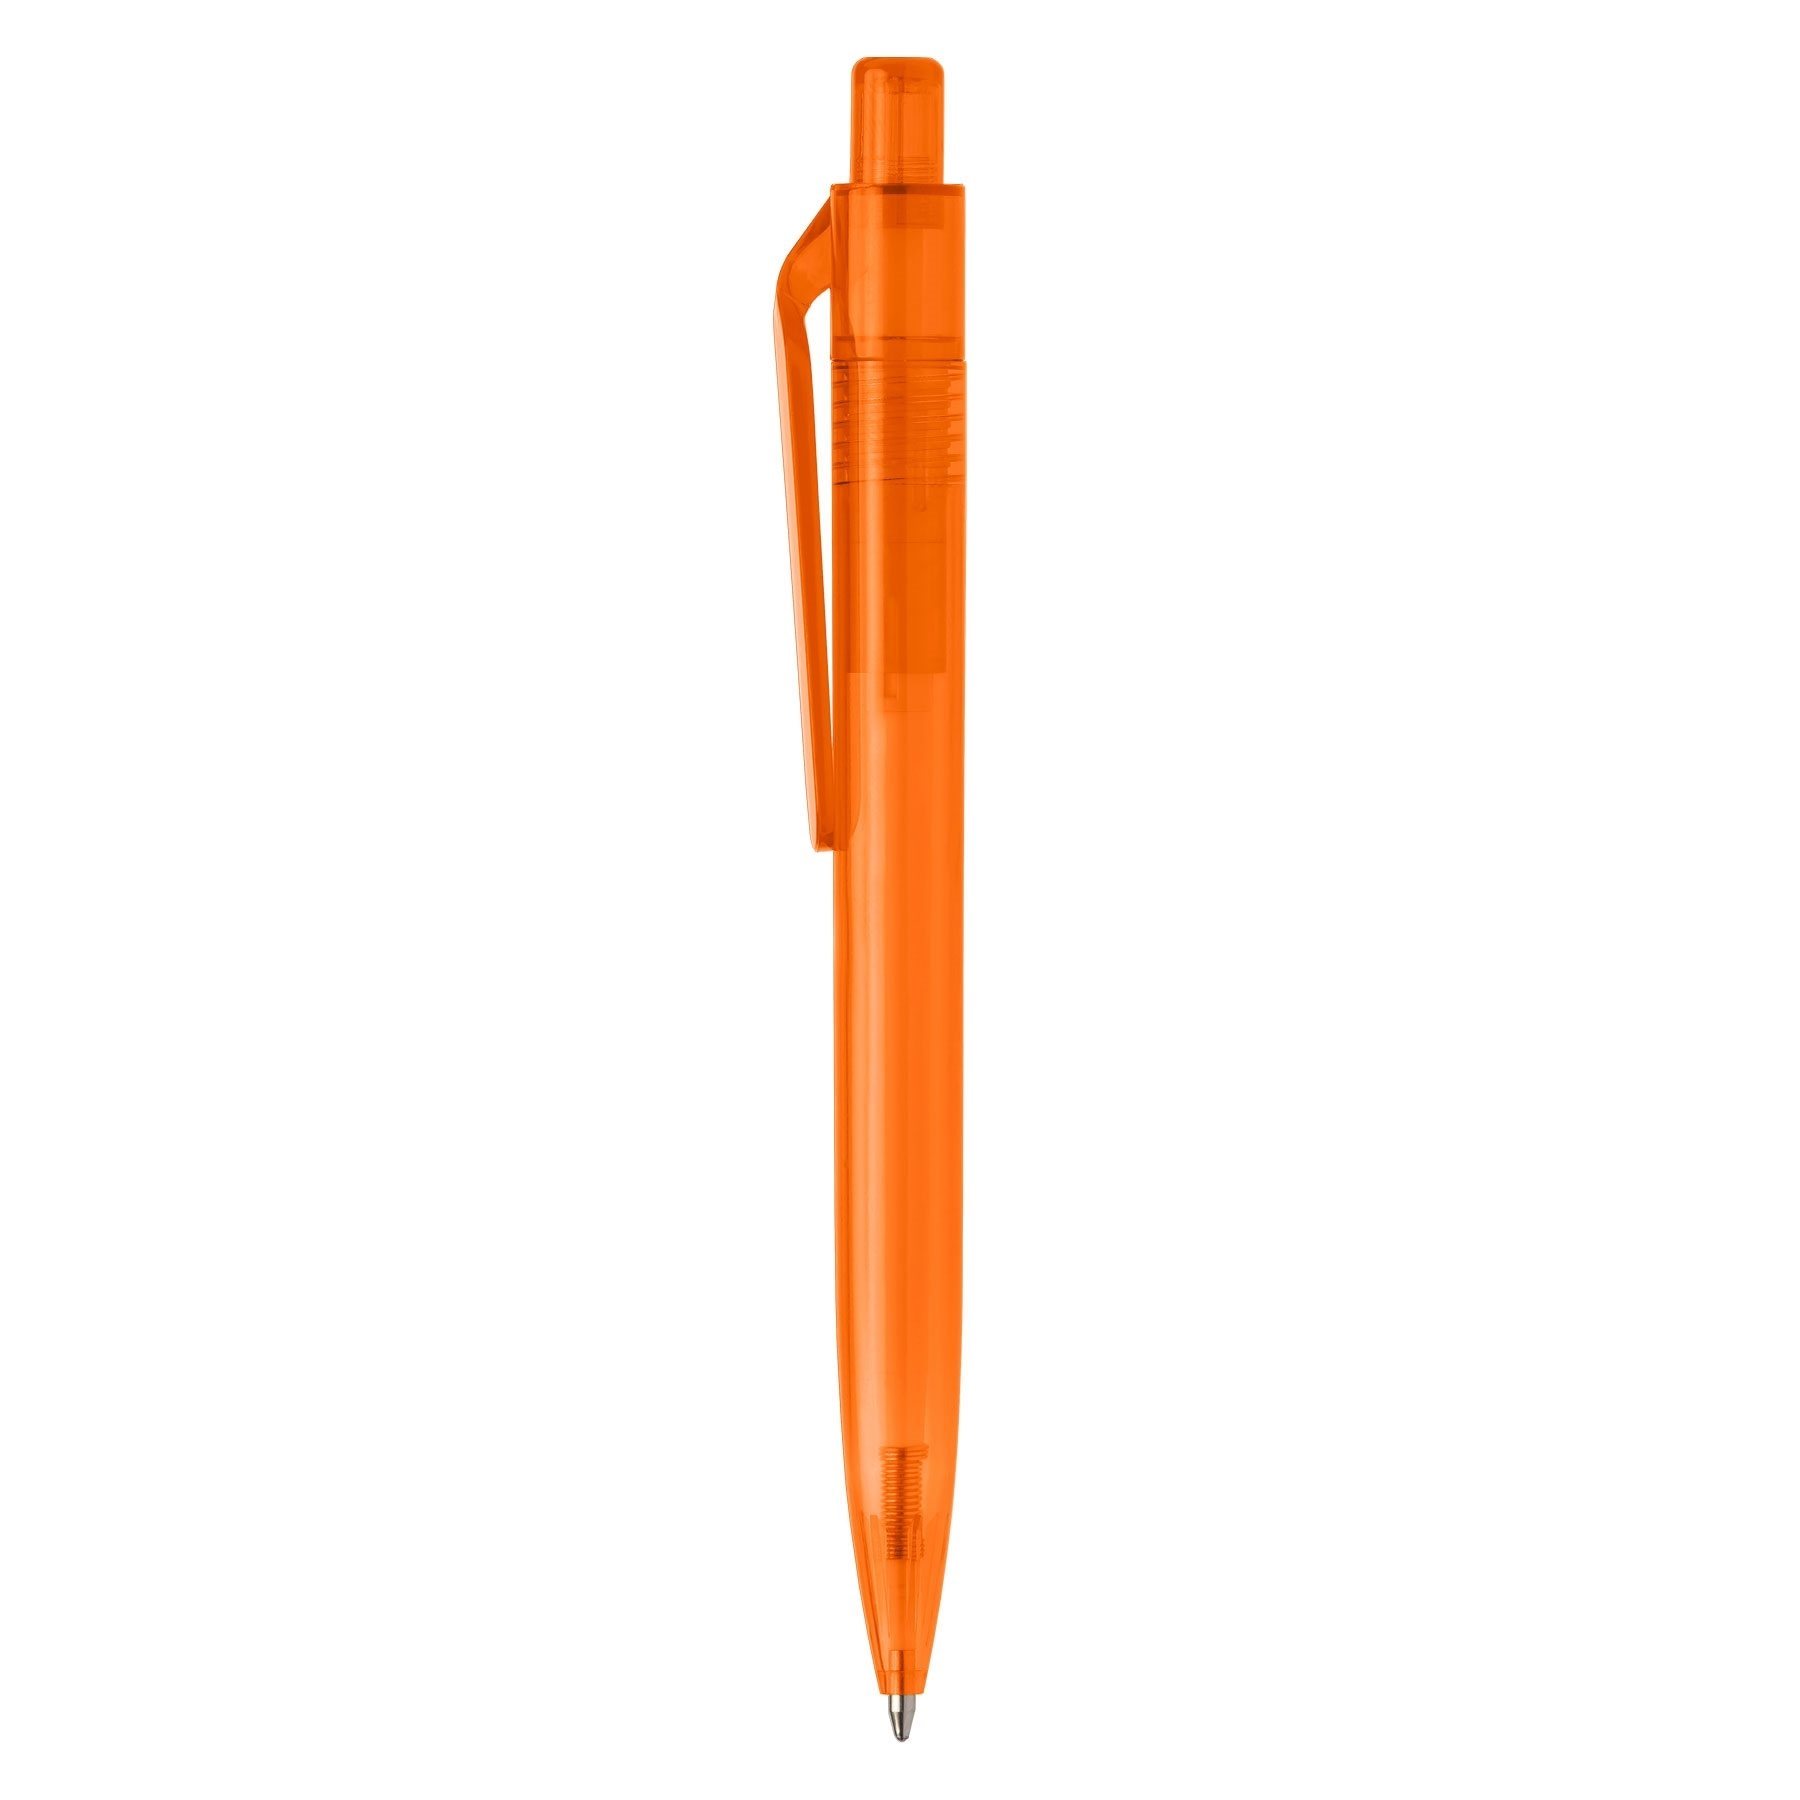 Can I choose different colors for the pen body and the logo imprint?